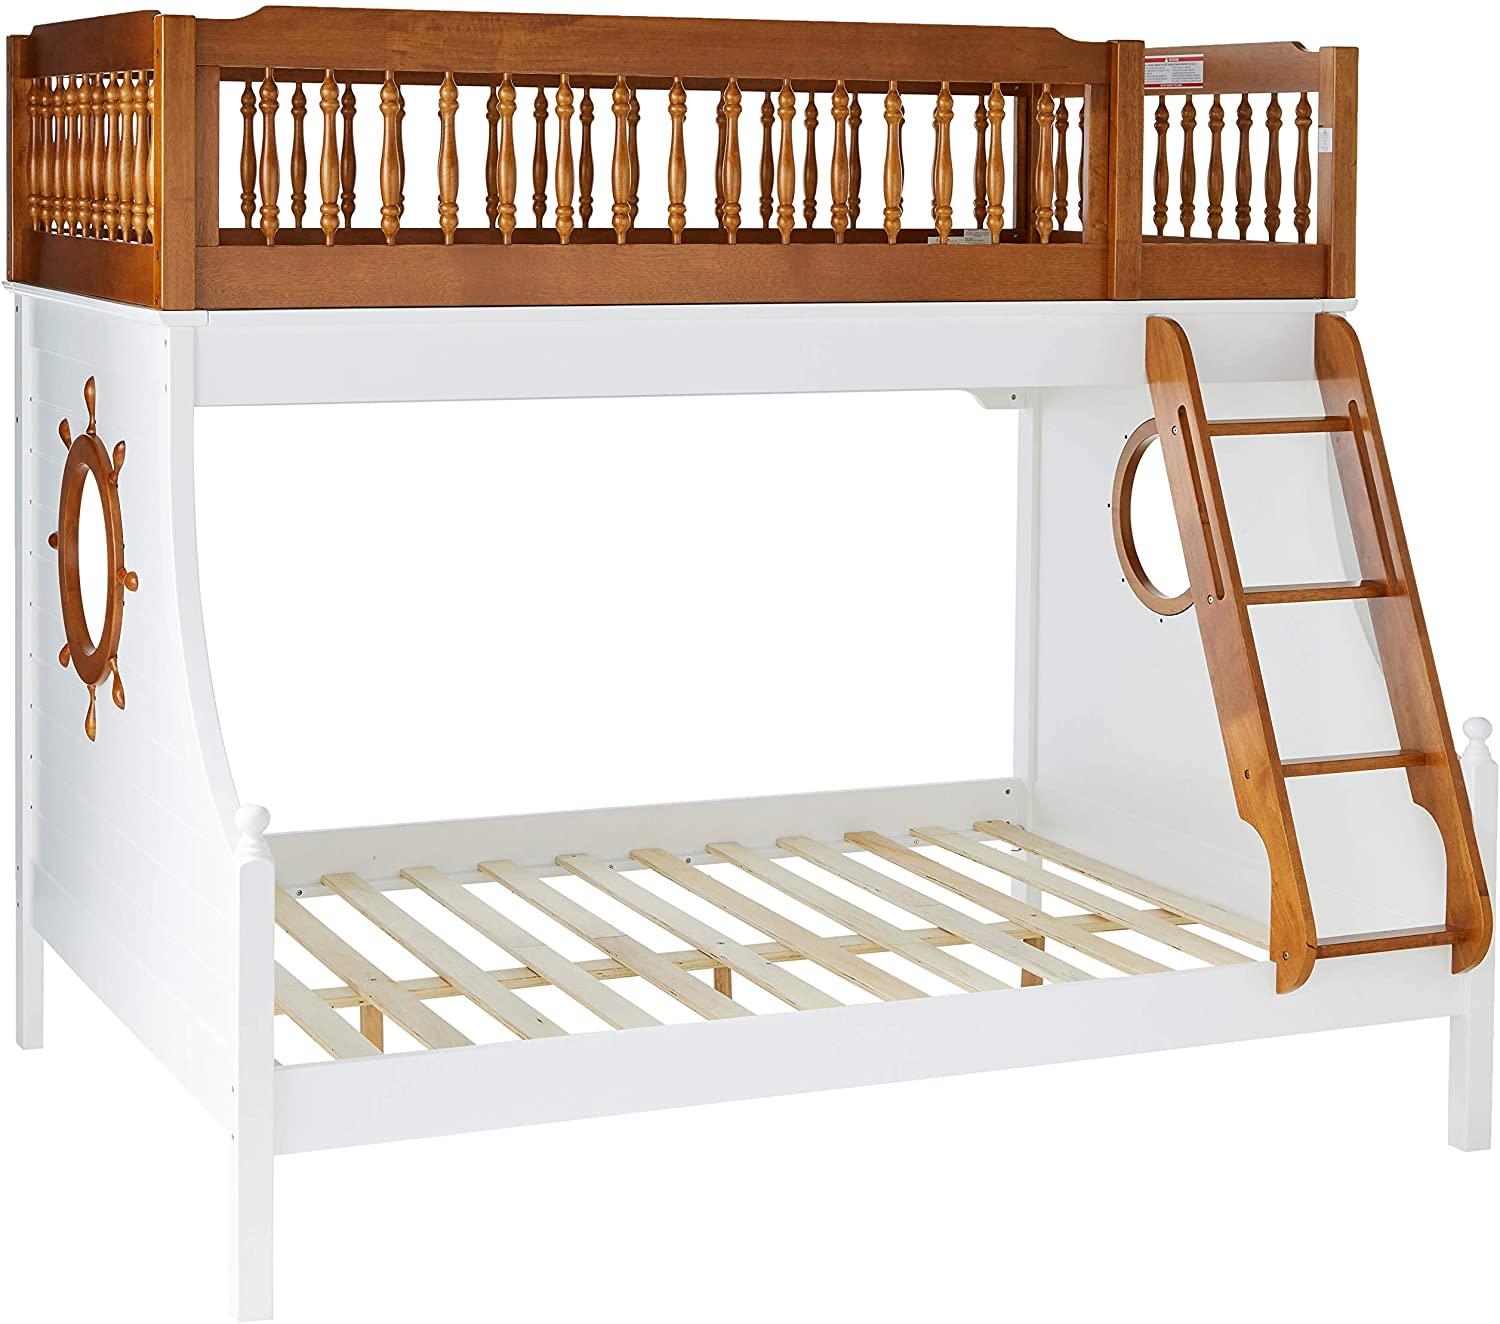 

    
Sailor Style Oak & White Twin/Full Bunk Bed by Acme Farah 37600
